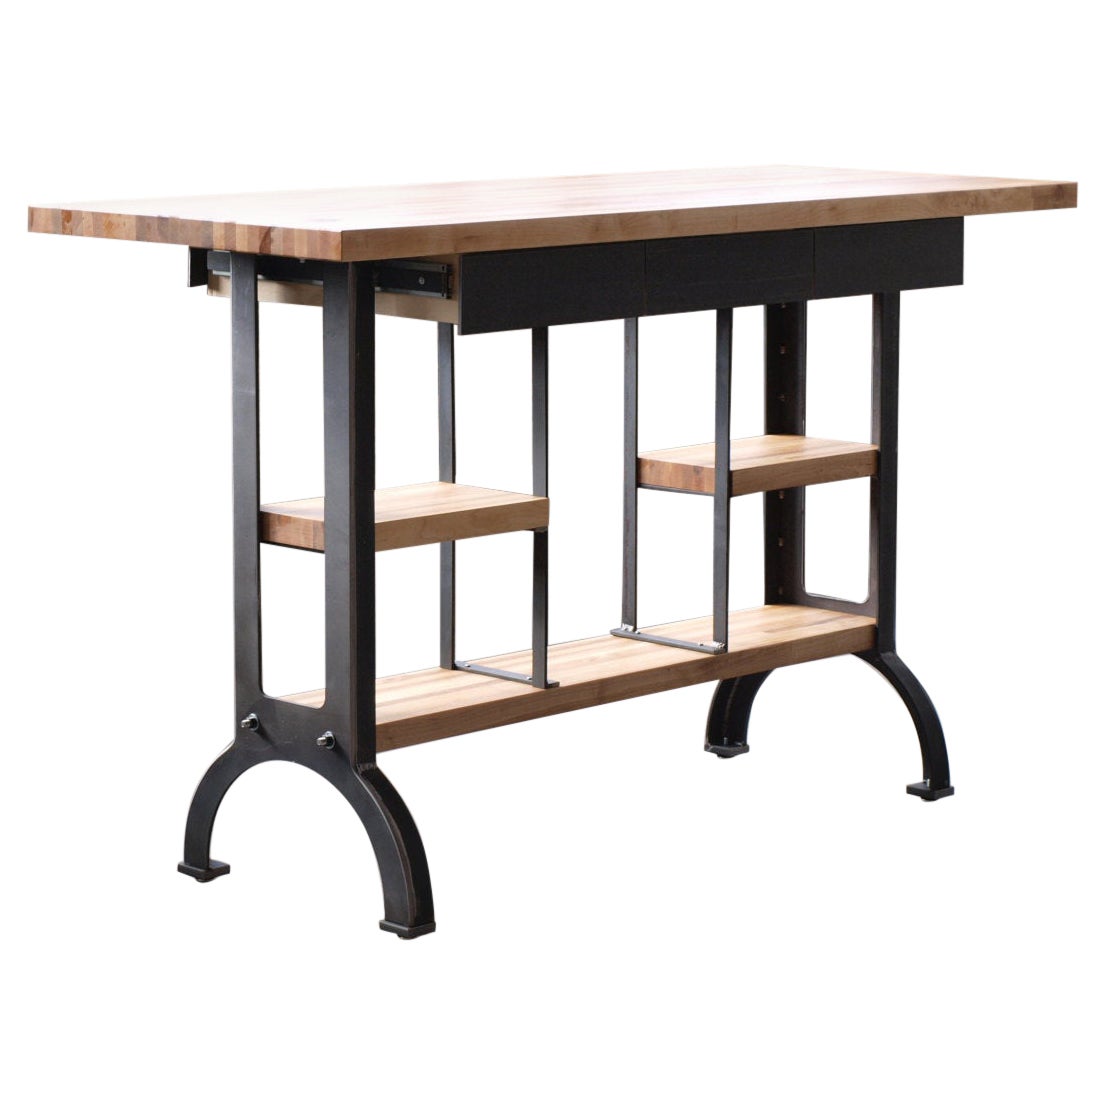 Maple Modern Industrial Kitchen Island Work table For Sale